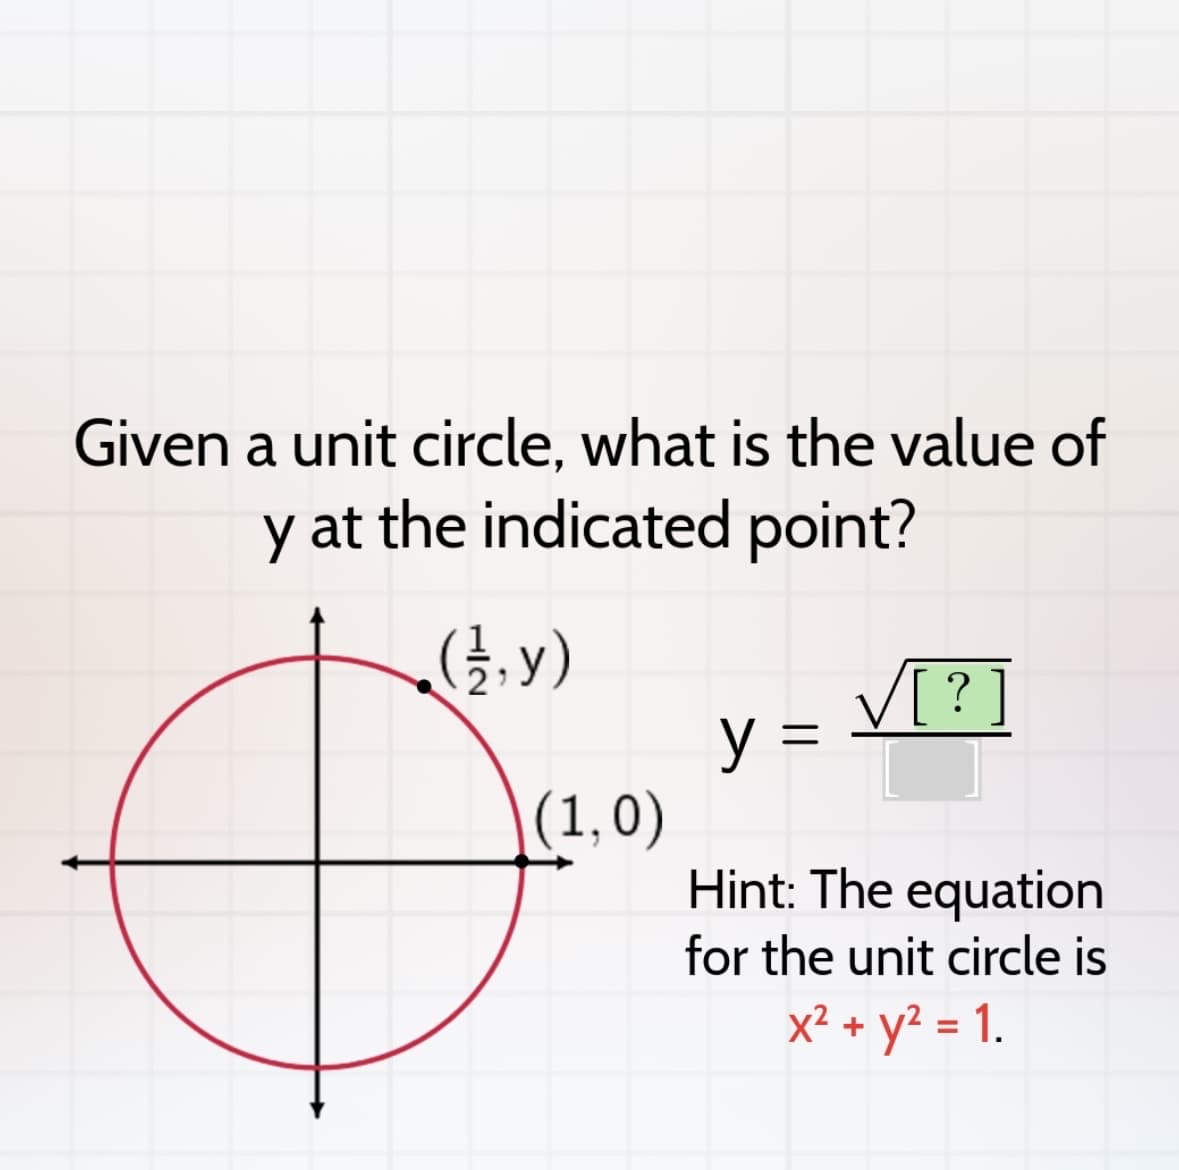 Given a unit circle, what is the value of
y at the indicated point?
y)
(1,0)
y
=
√[?]
Hint: The equation
for the unit circle is
x² + y² = 1.